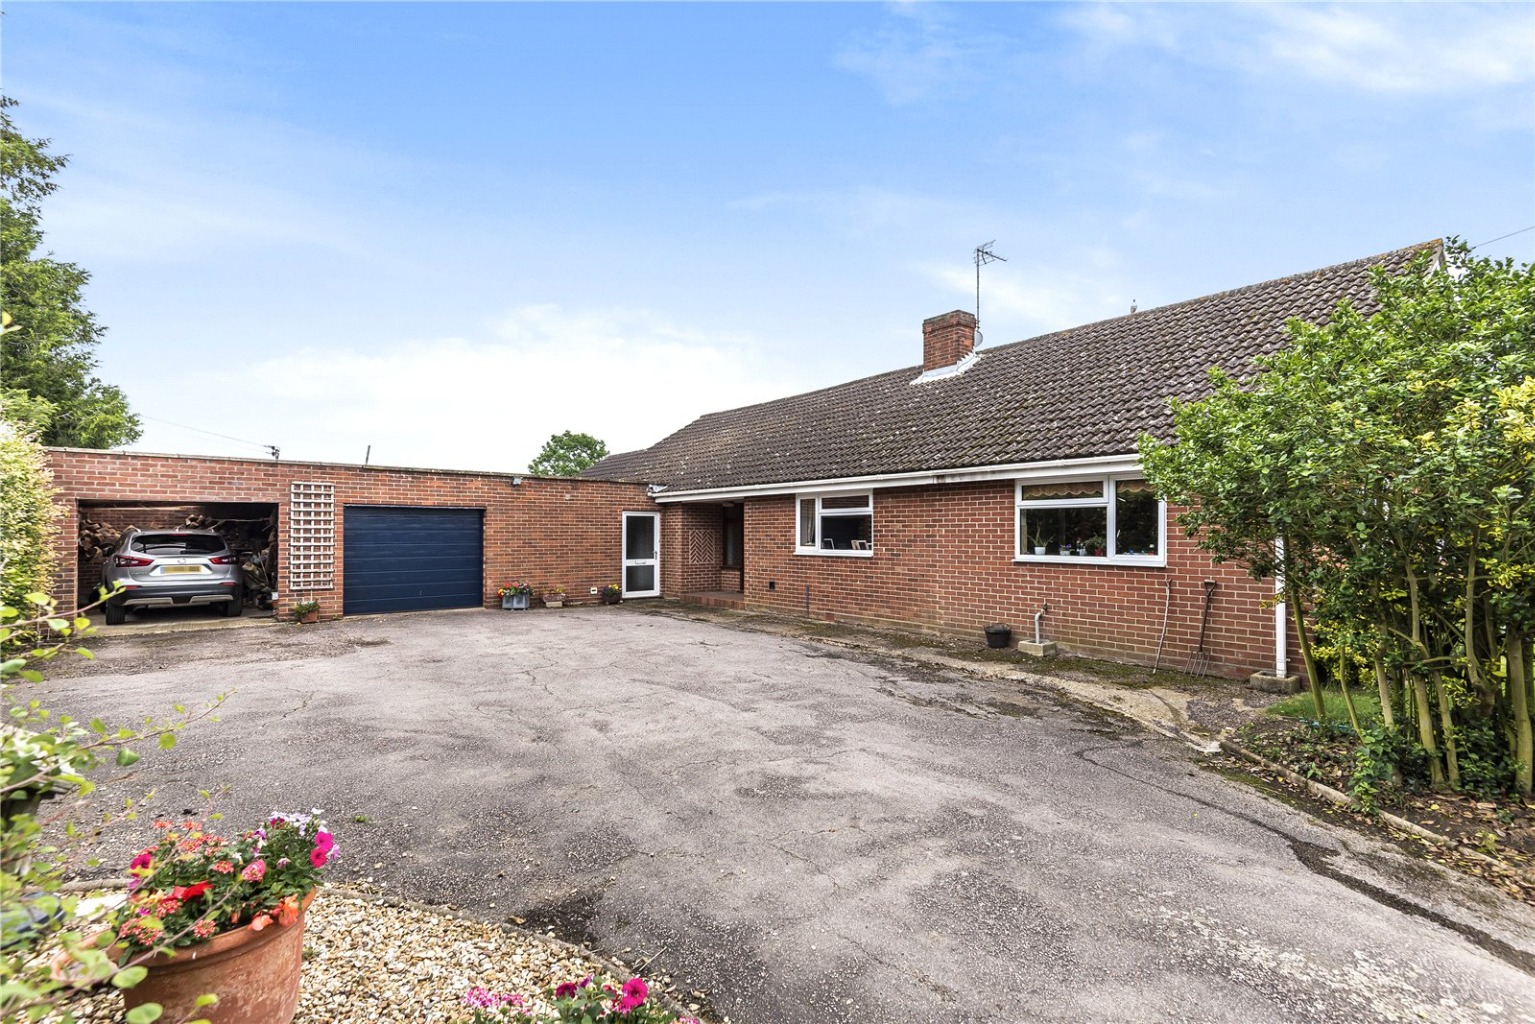 3 bed detached house for sale in Wintringham, St. Neots 1